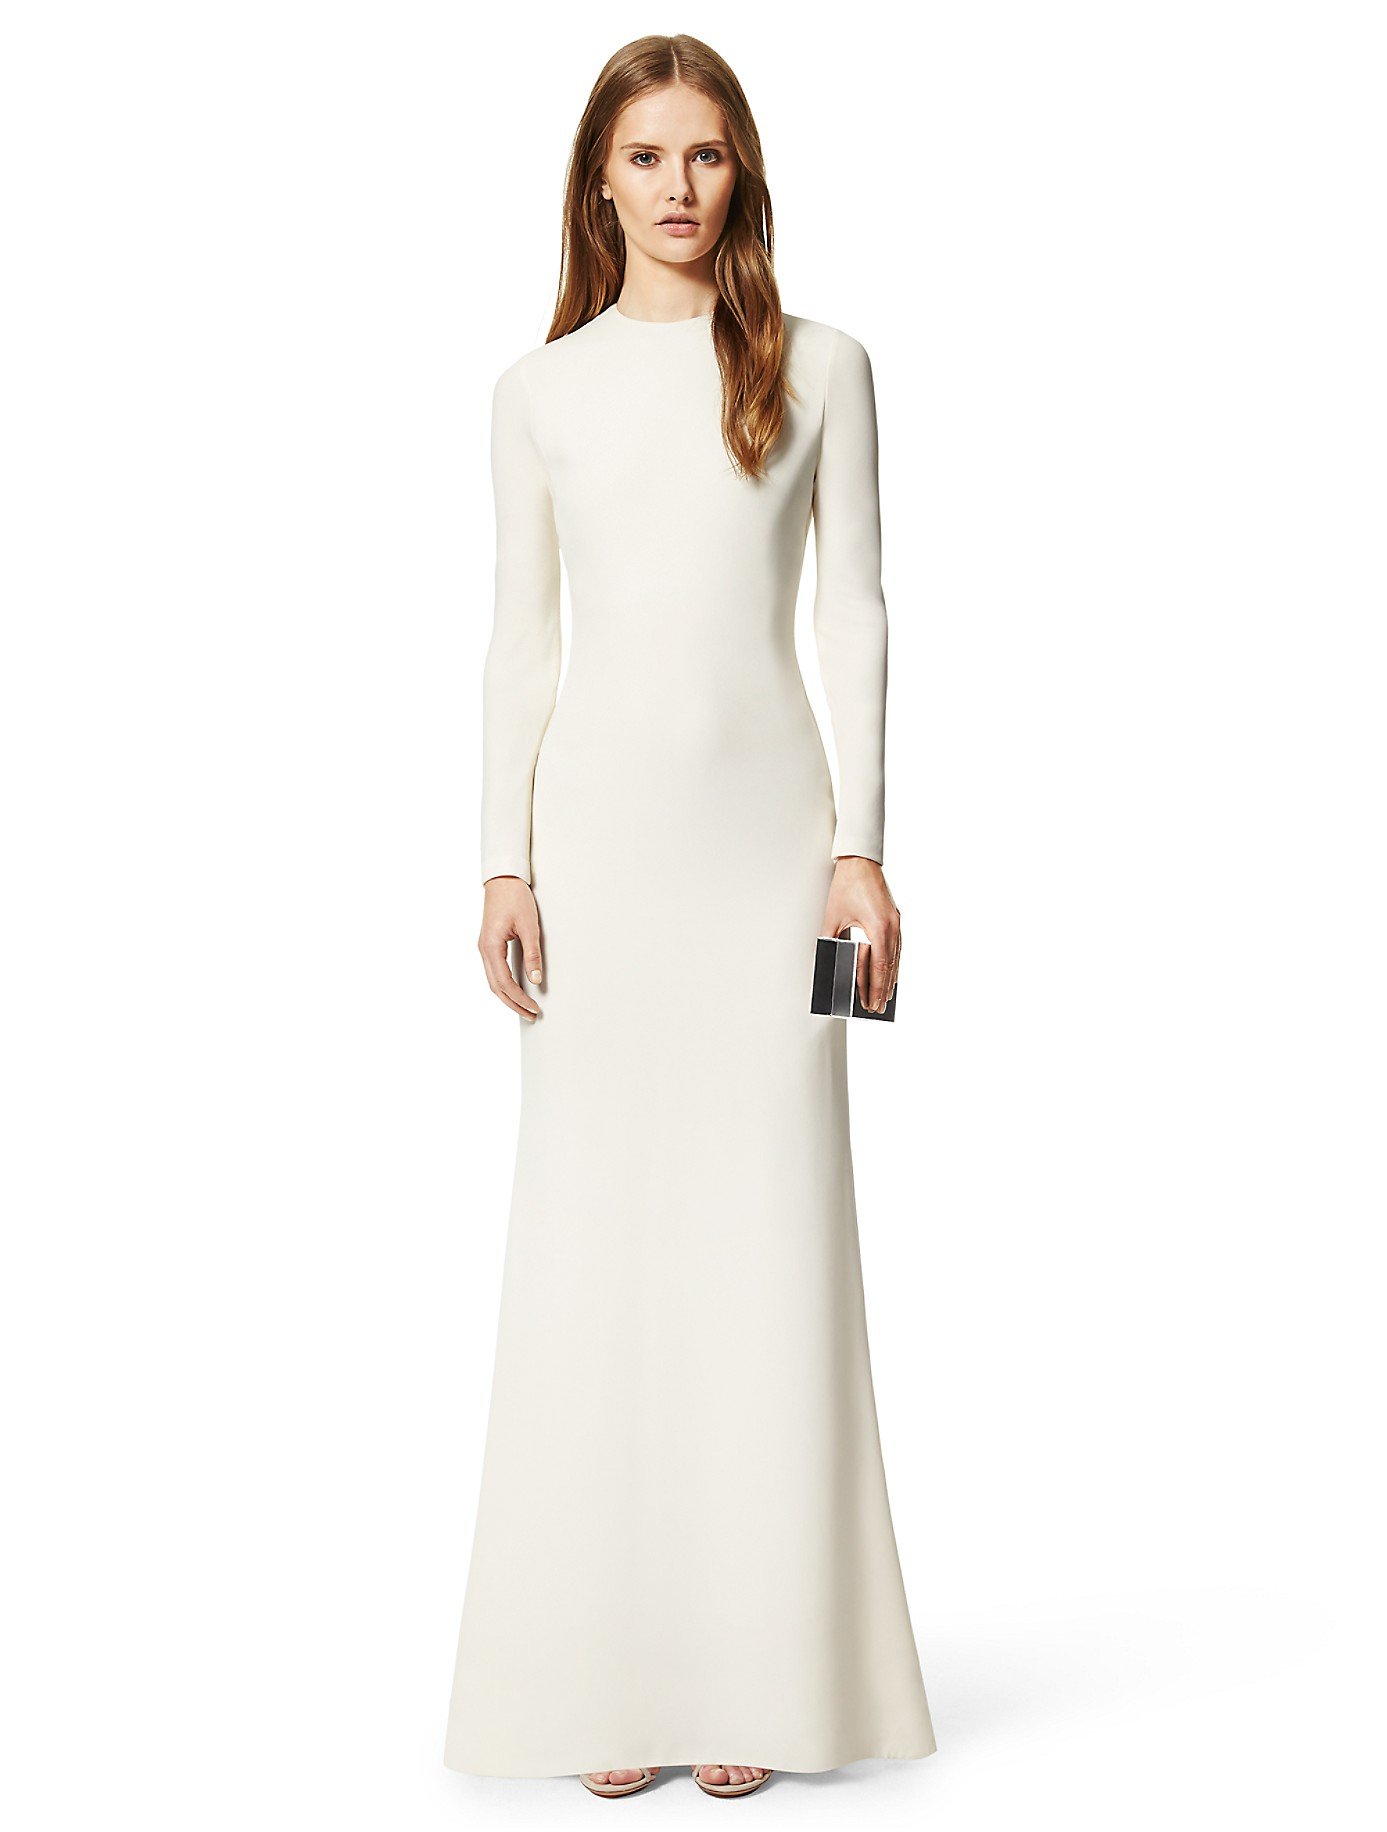 Calvin Klein Collection Crepe Long Sleeve Crew Neck Gown in White - Lyst